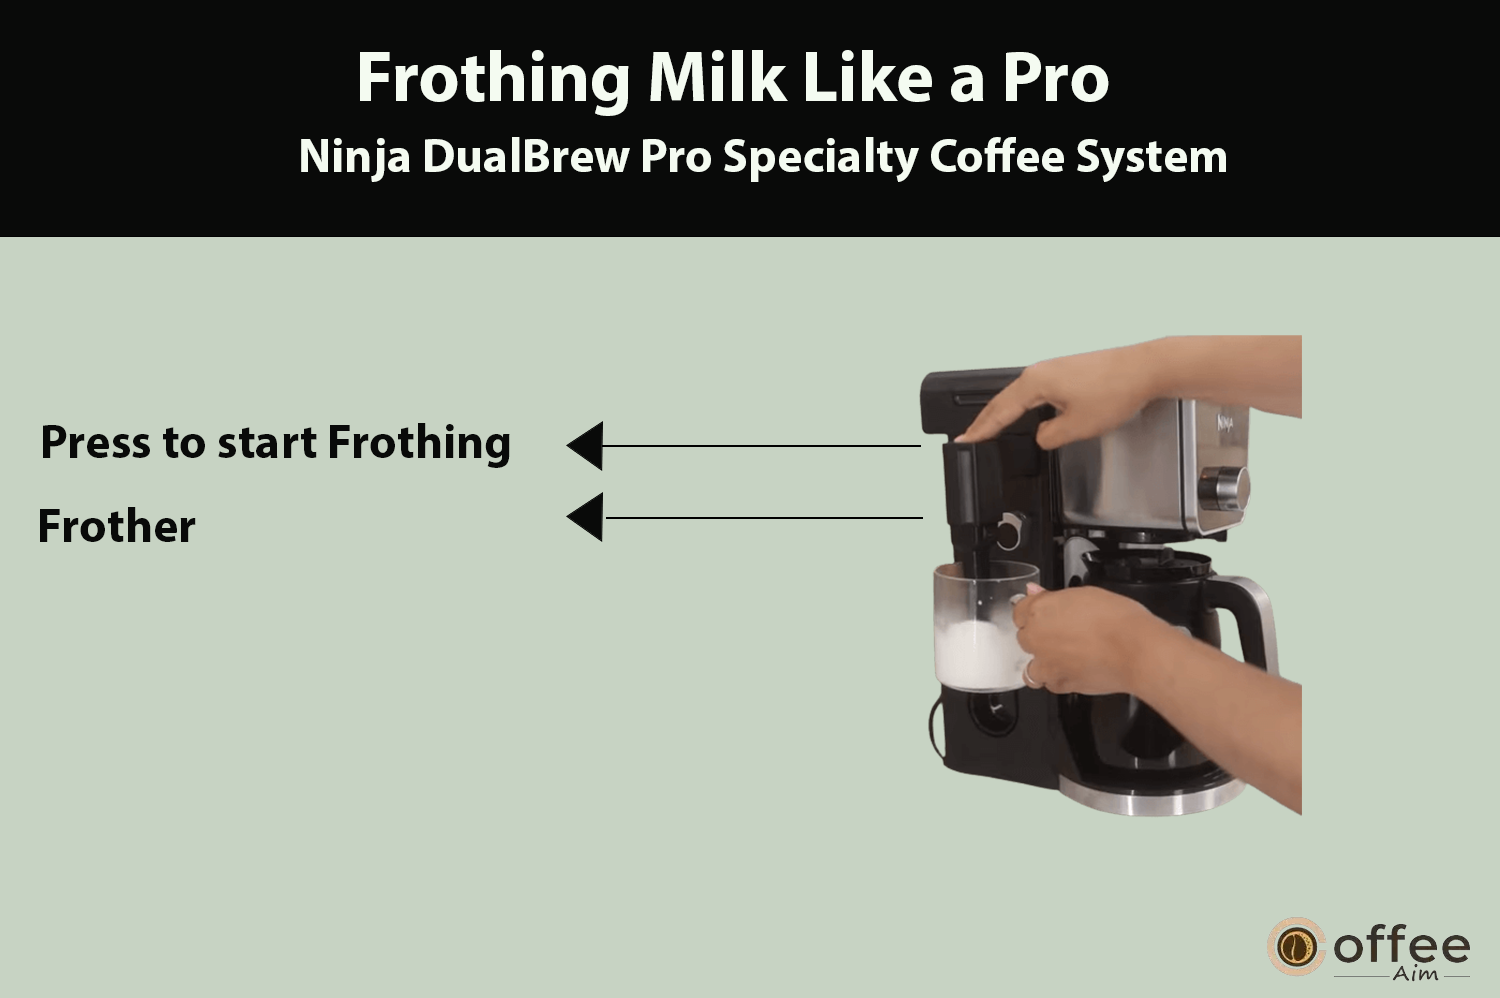 "This image showcases pressing the frother button to initiate frothing on the Ninja DualBrew Pro Specialty Coffee System, as highlighted in the article 'How to Use Ninja DualBrew Pro Specialty Coffee System, Compatible with K-Cup Pods, and 12-Cup Drip Coffee Maker'."